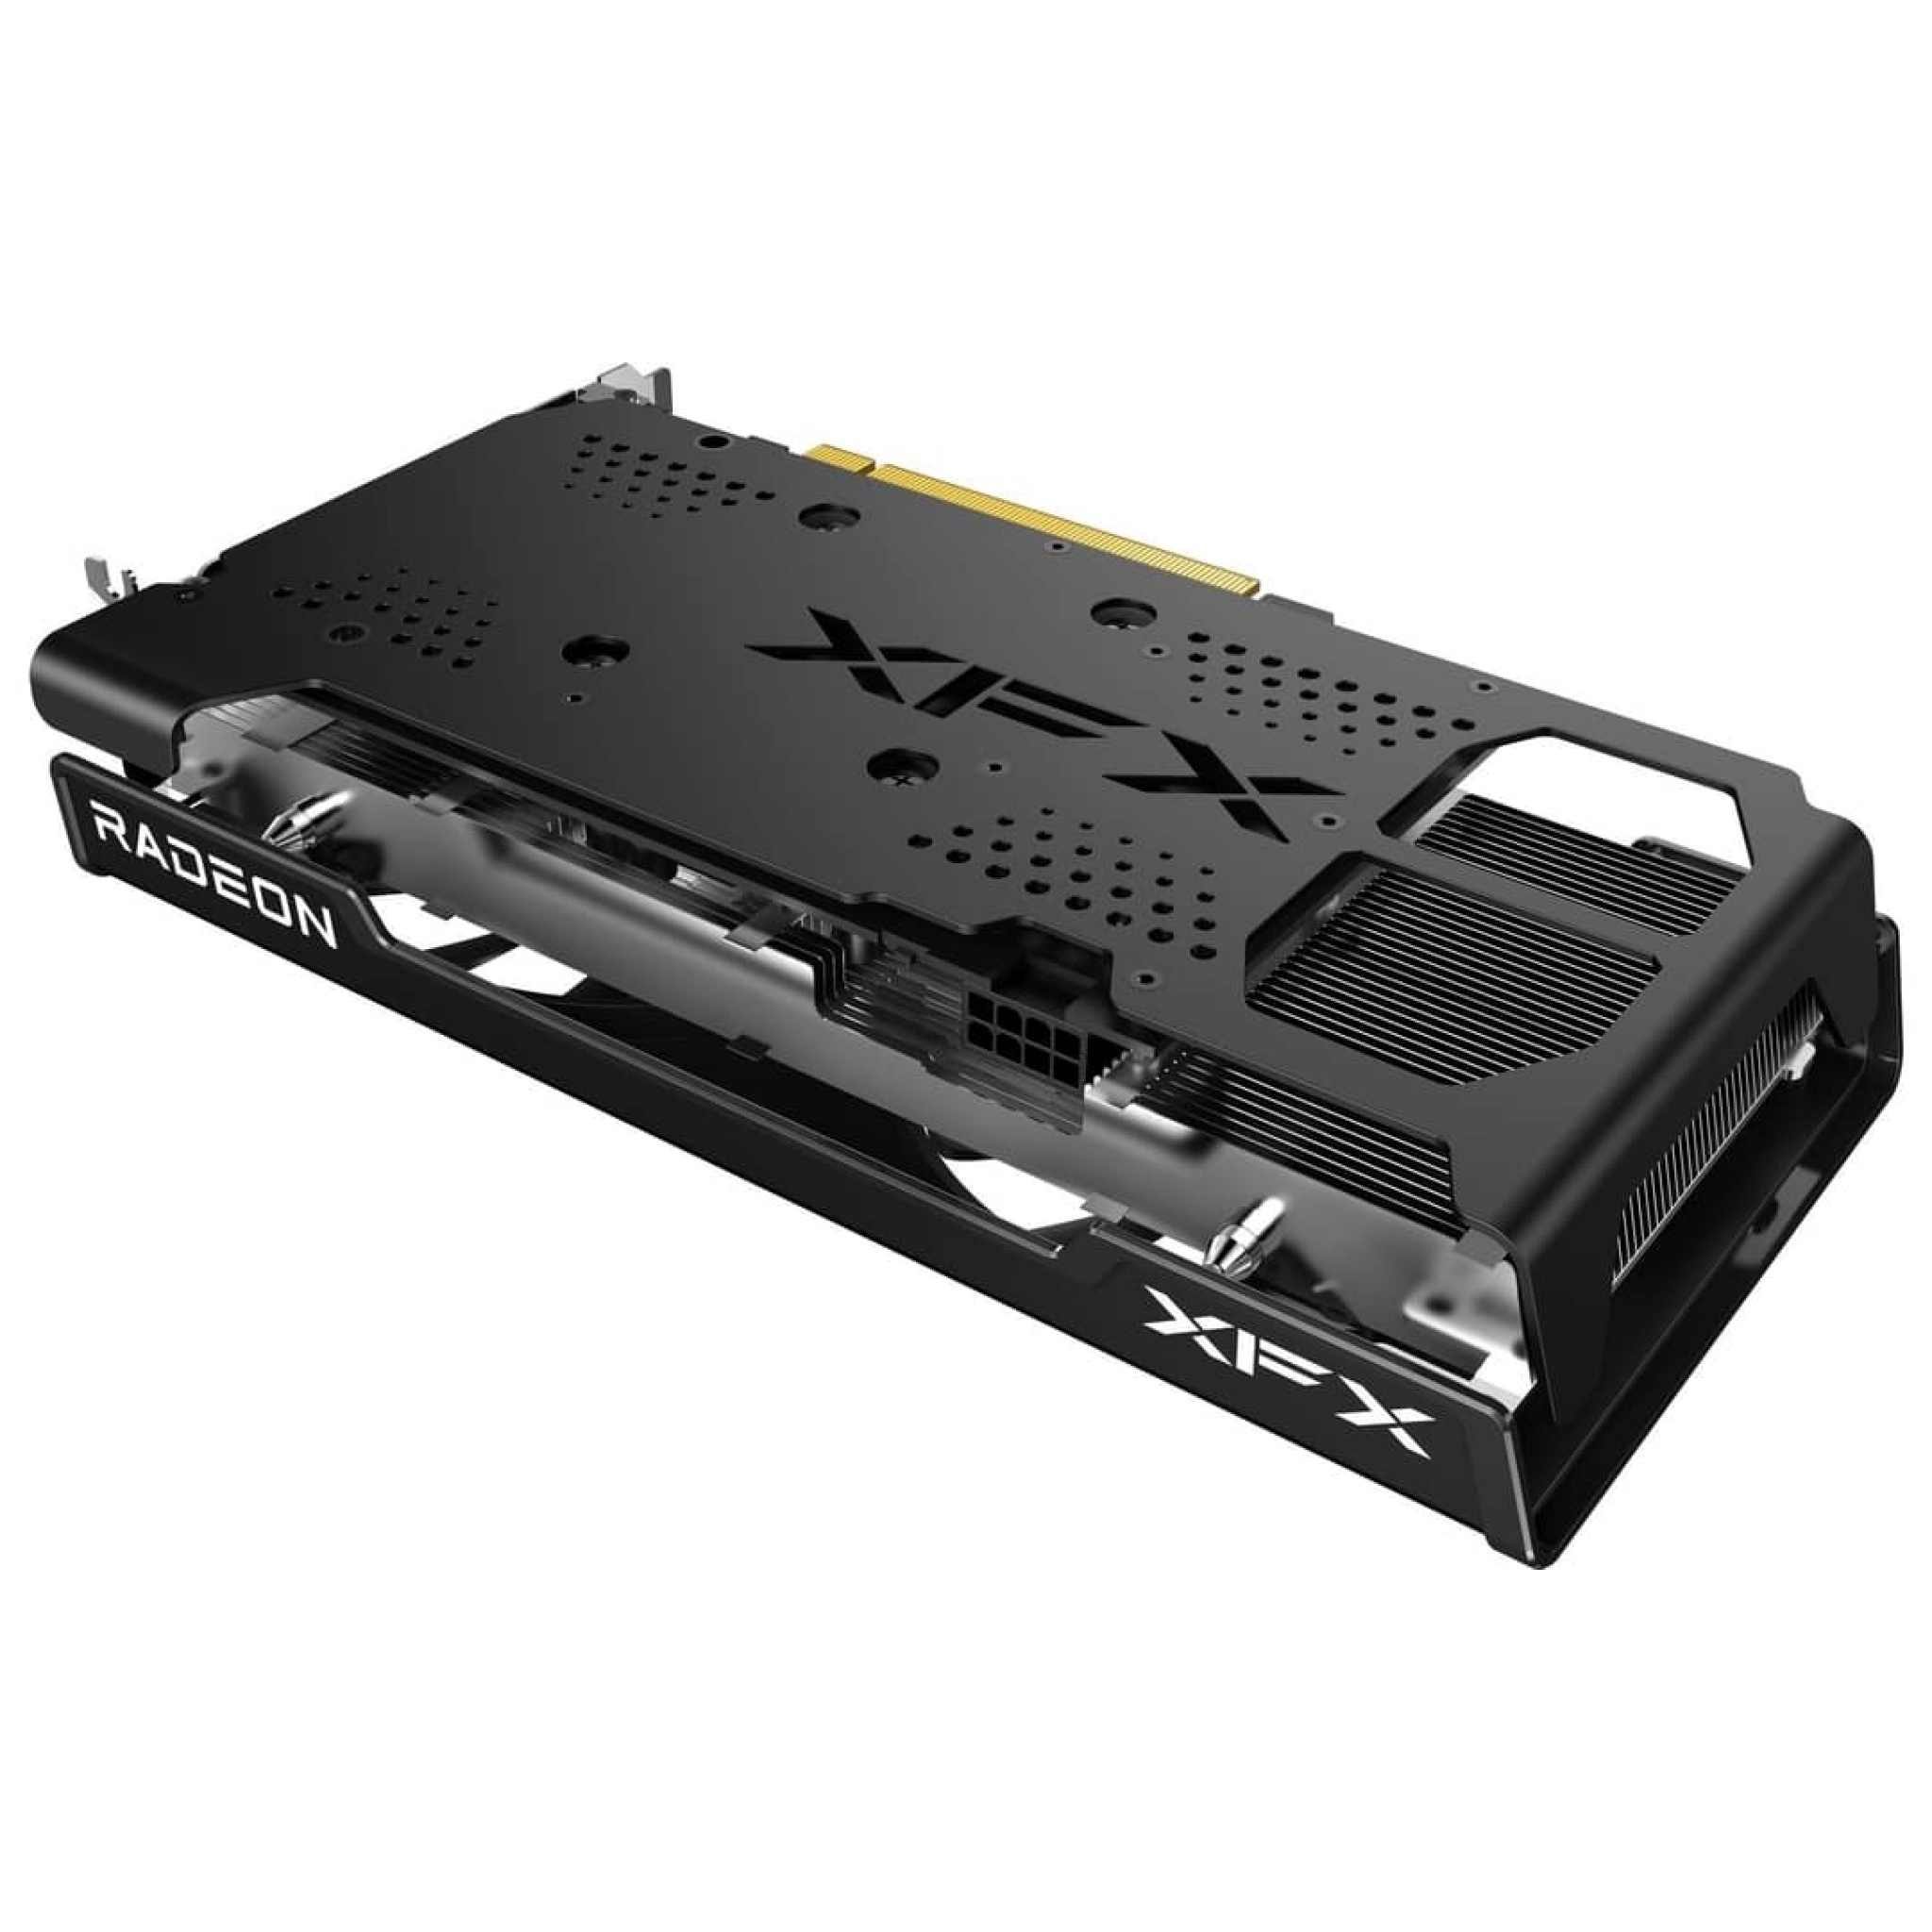 XFX Speedster SWFT 210 AMD Radeon™ RX 6600 XT Core Gaming Graphics Card  with 8GB GDDR6, AMD RDNA™ 2